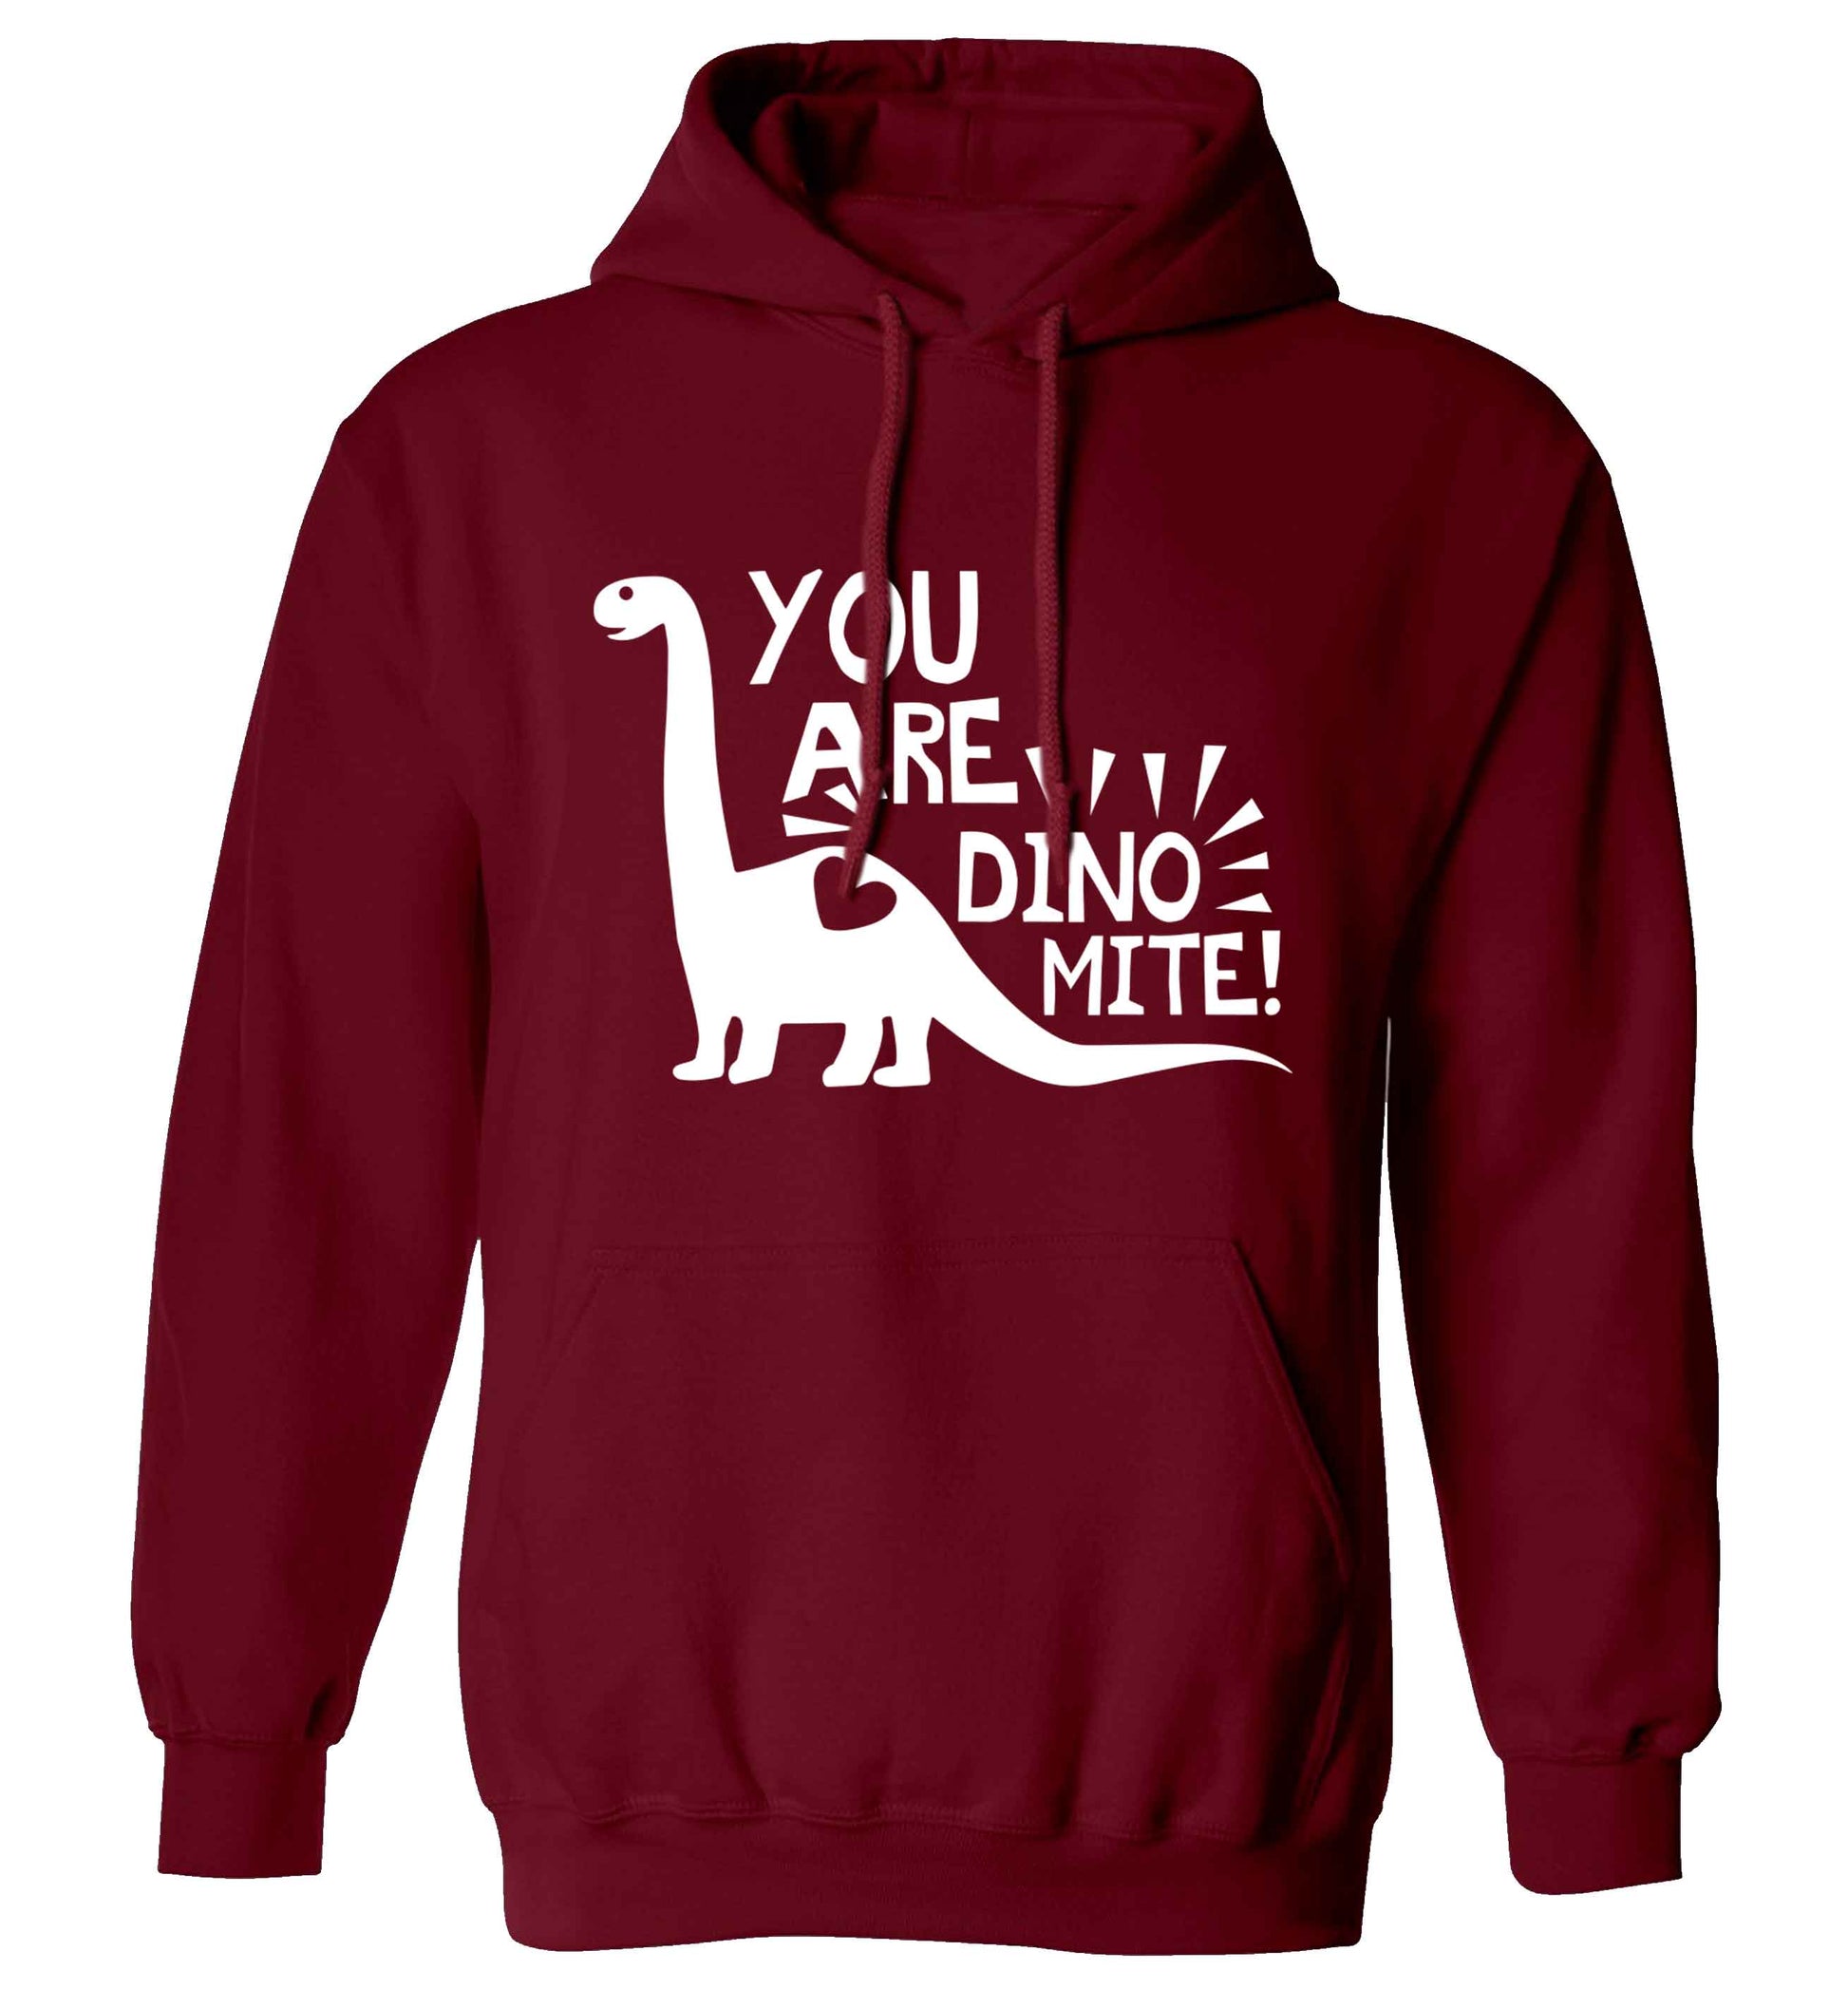 You are dinomite! adults unisex maroon hoodie 2XL